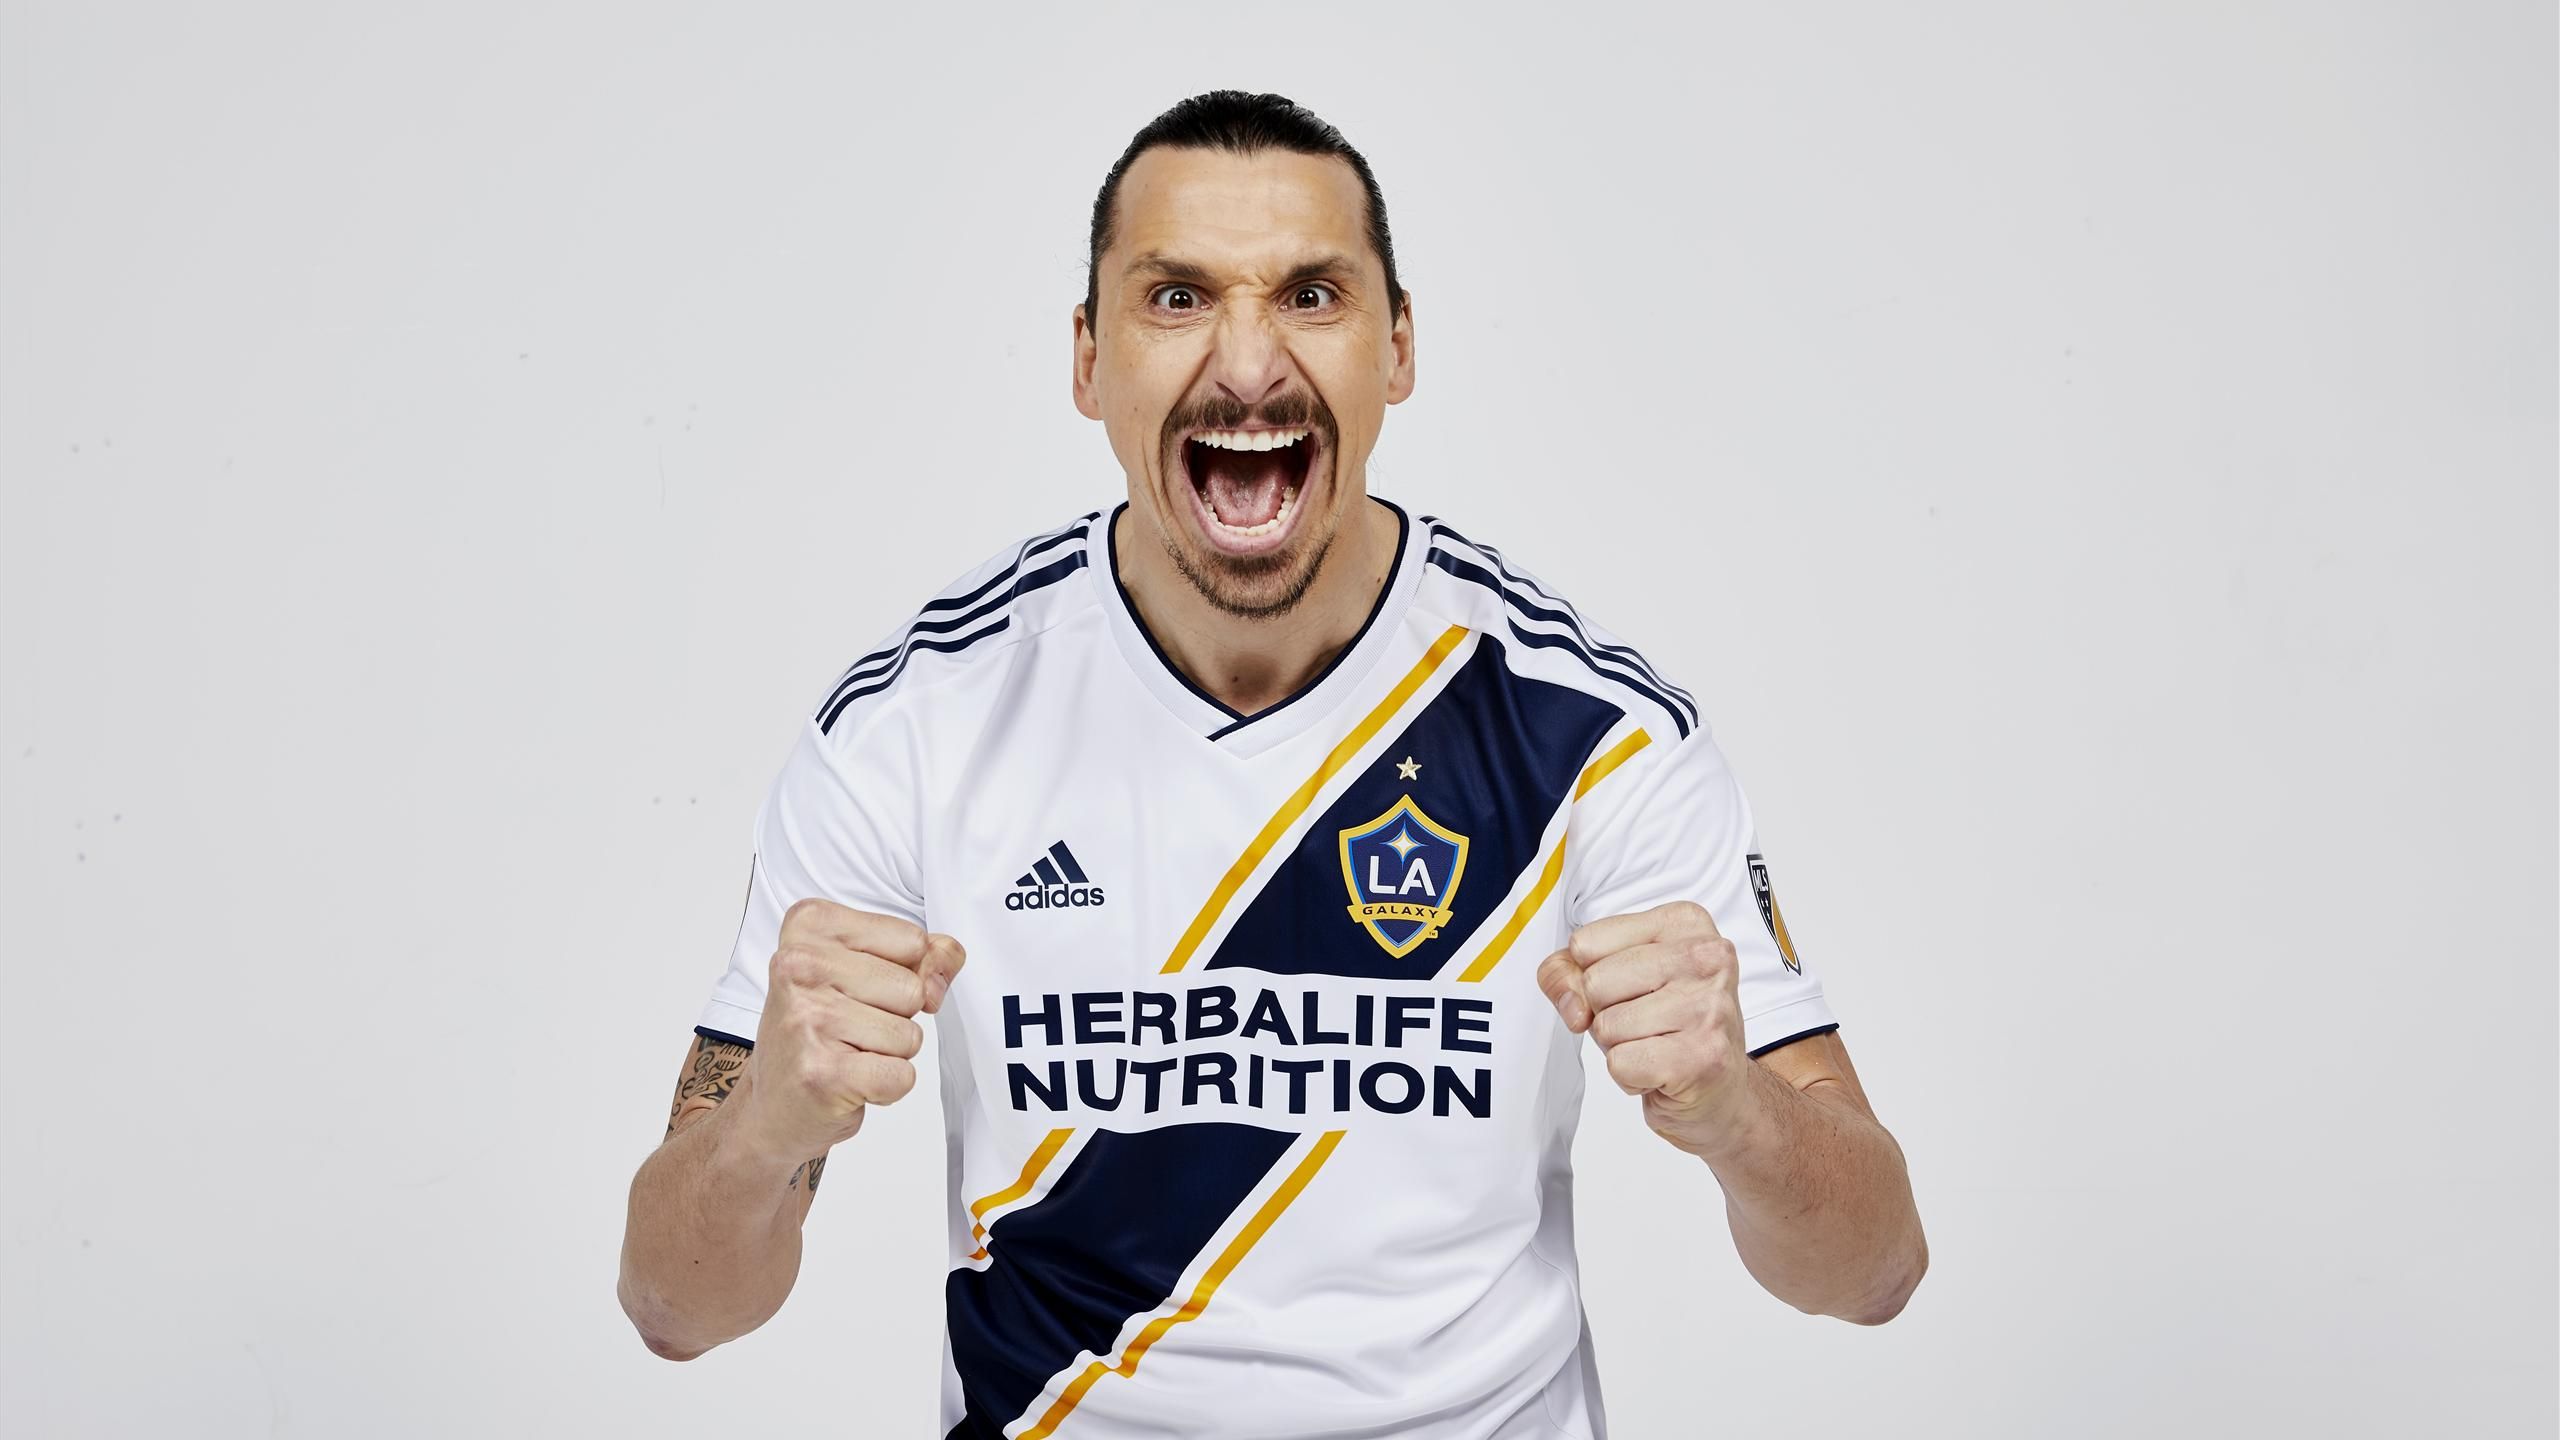 Zlatan Ibrahimovic LA Galaxy jerseys selling for up to £127 a pop